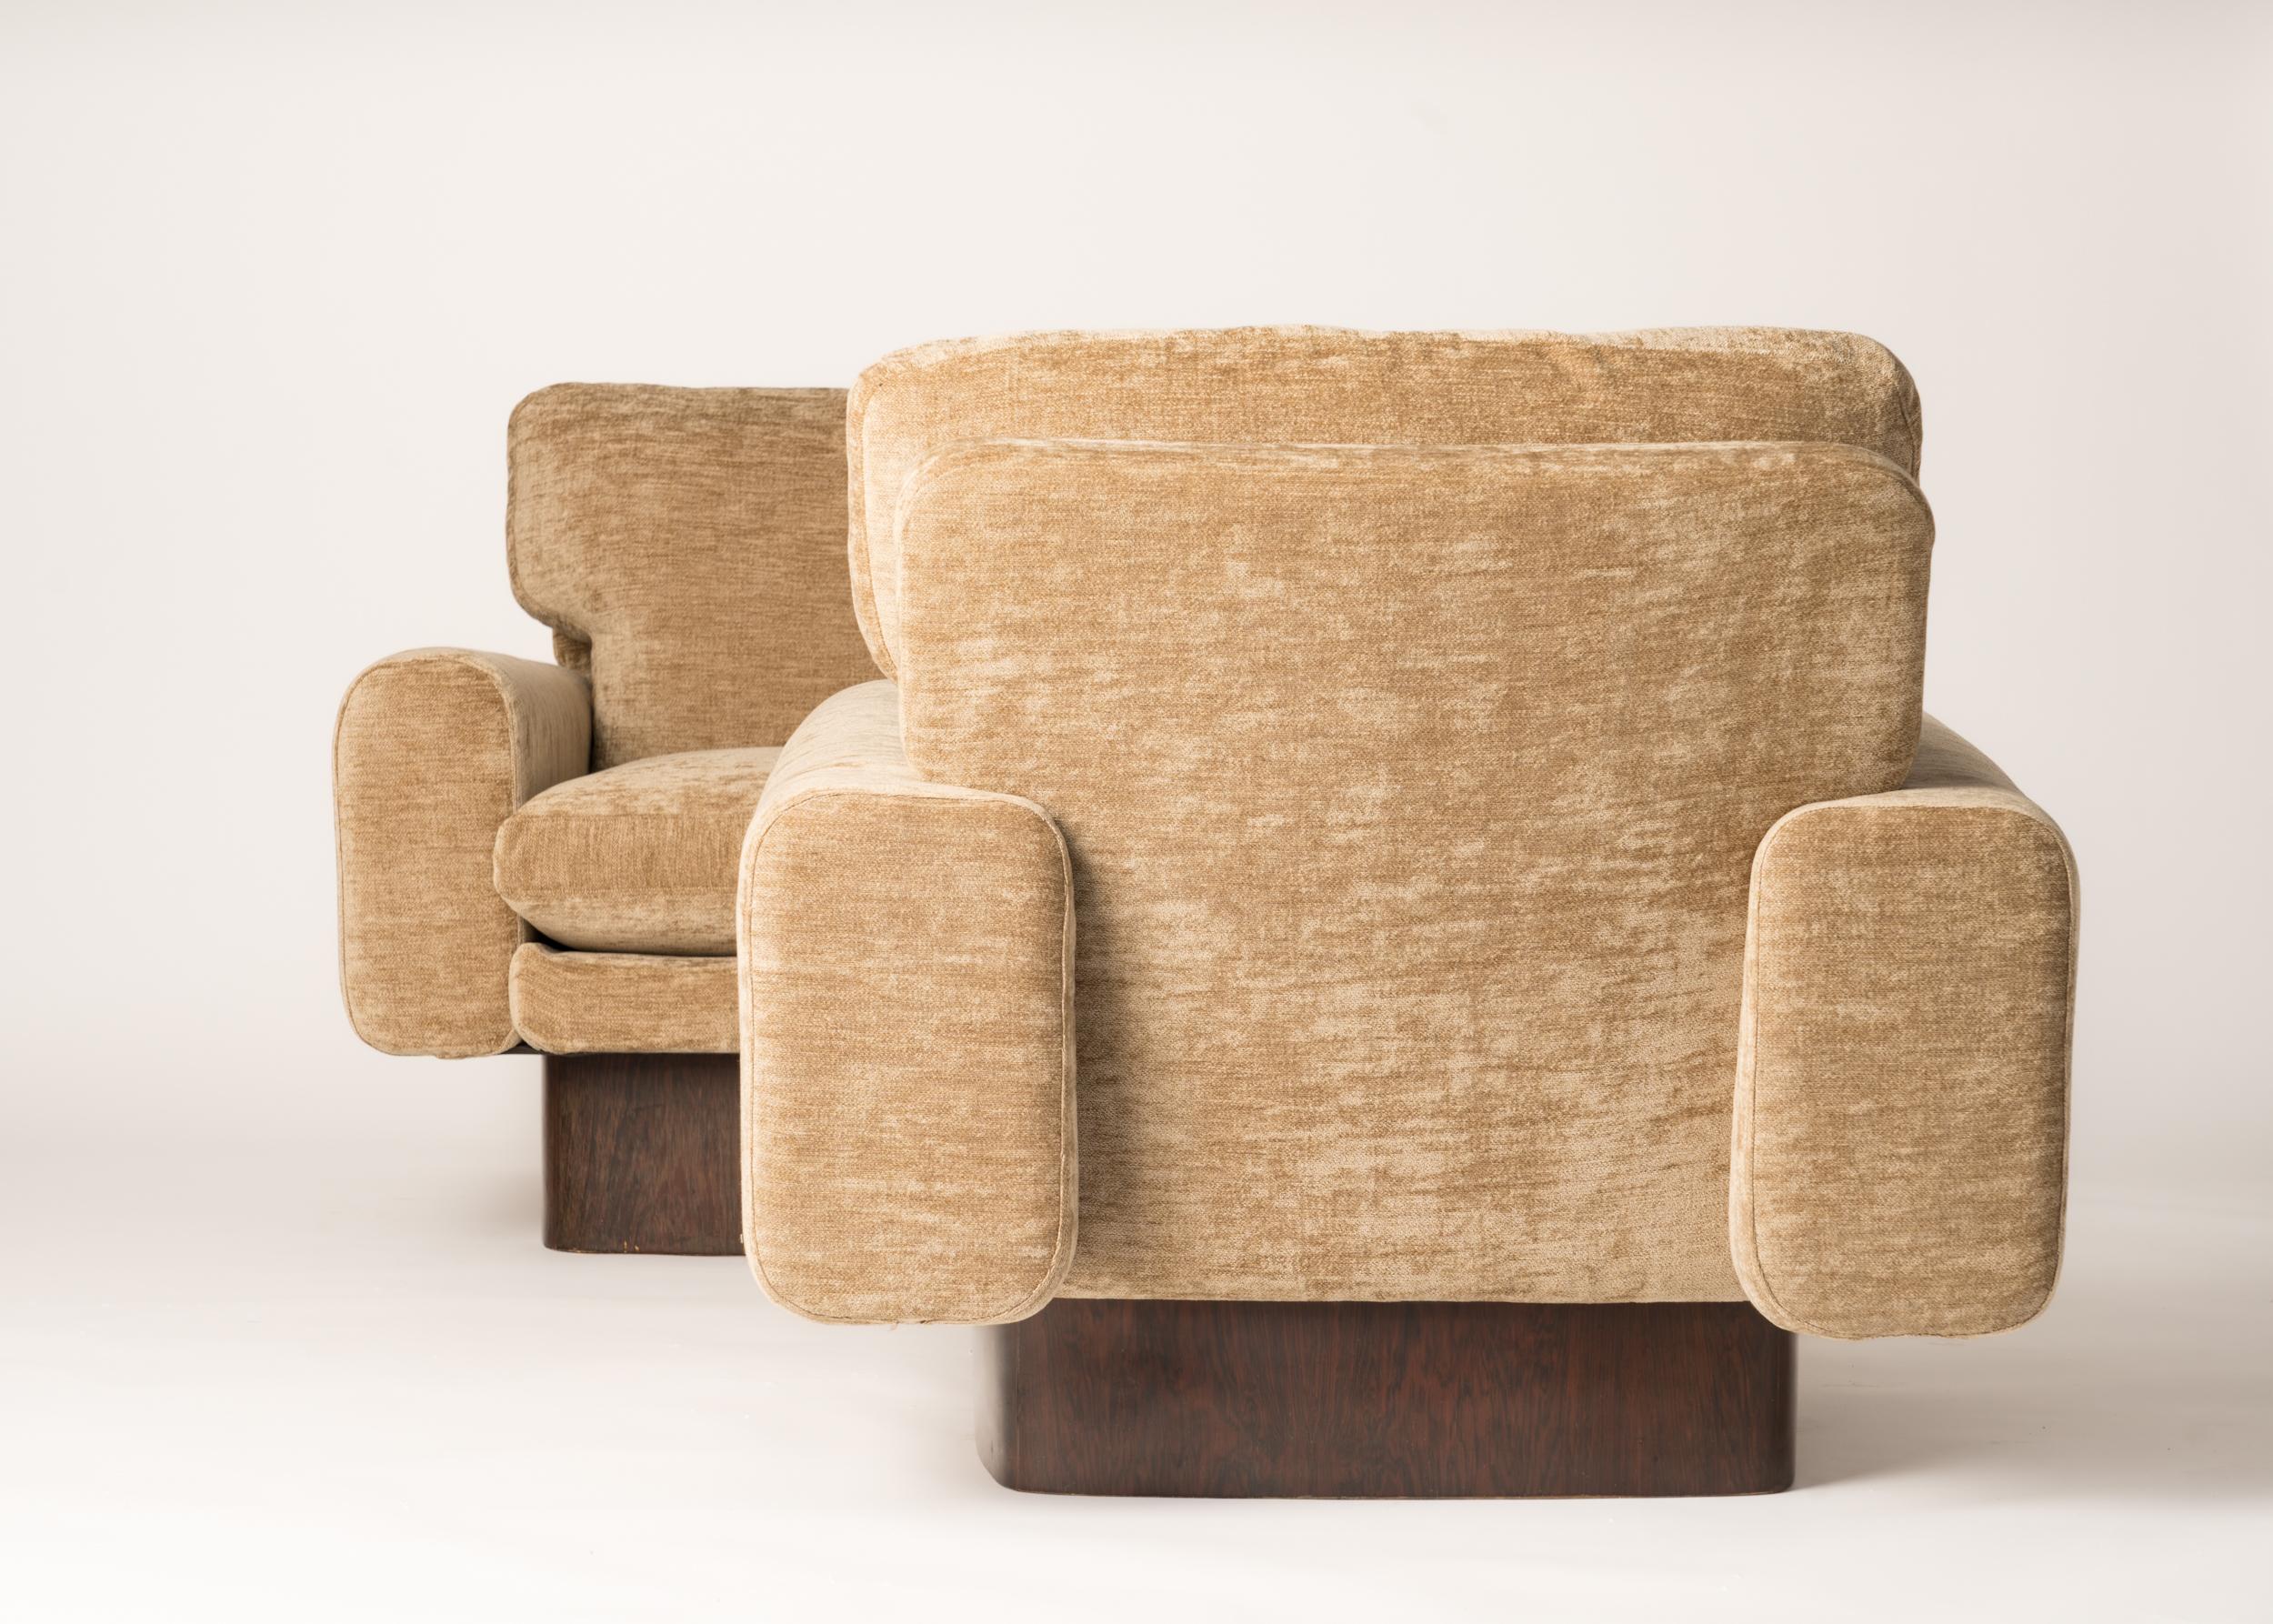 Pair of sculptural 1970's Italian armchairs made of two singular barrel shaped armrests and fluffy down filled cushions freshly re-upholstered with a luxurious silk blend golden brown velvet. The seats rest over circular walnut veneer wood